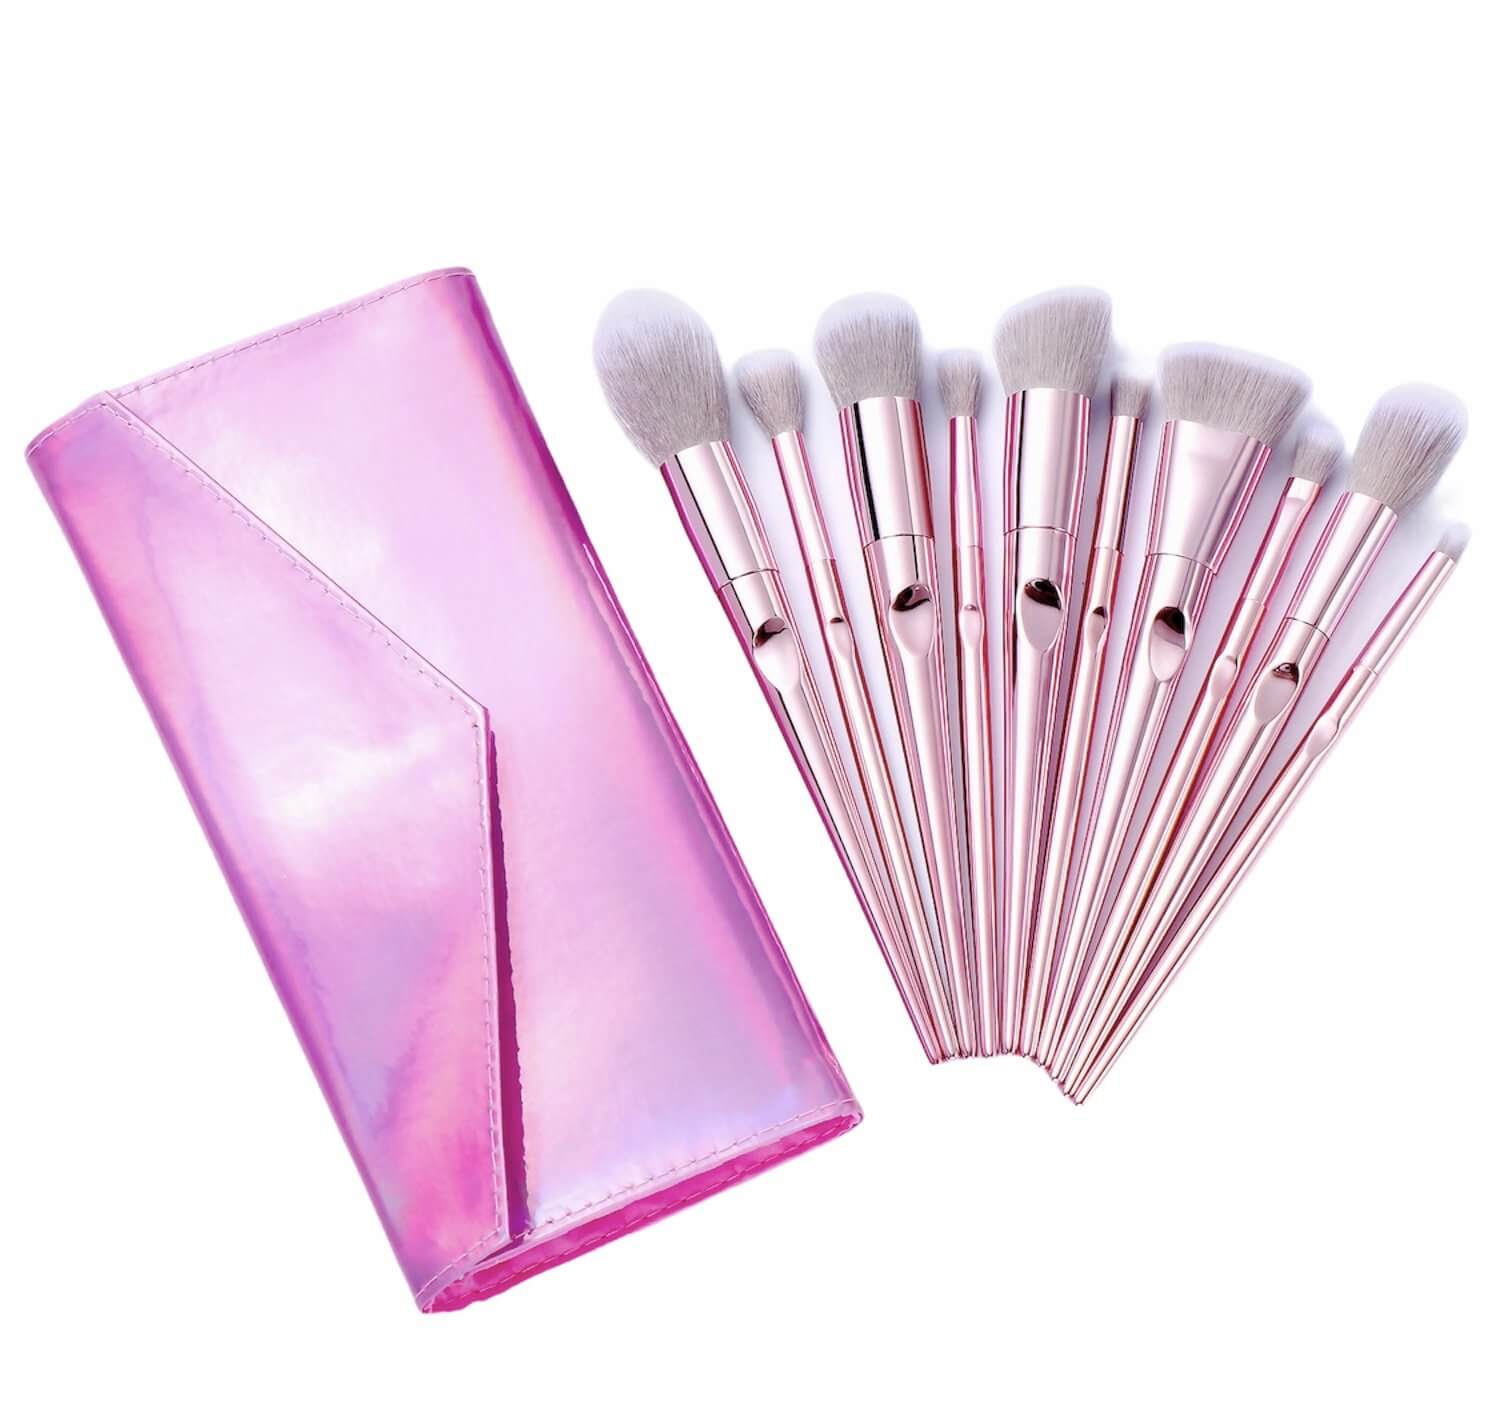 10 pc. Pink Makeup Brushes &amp; Pink Clutch